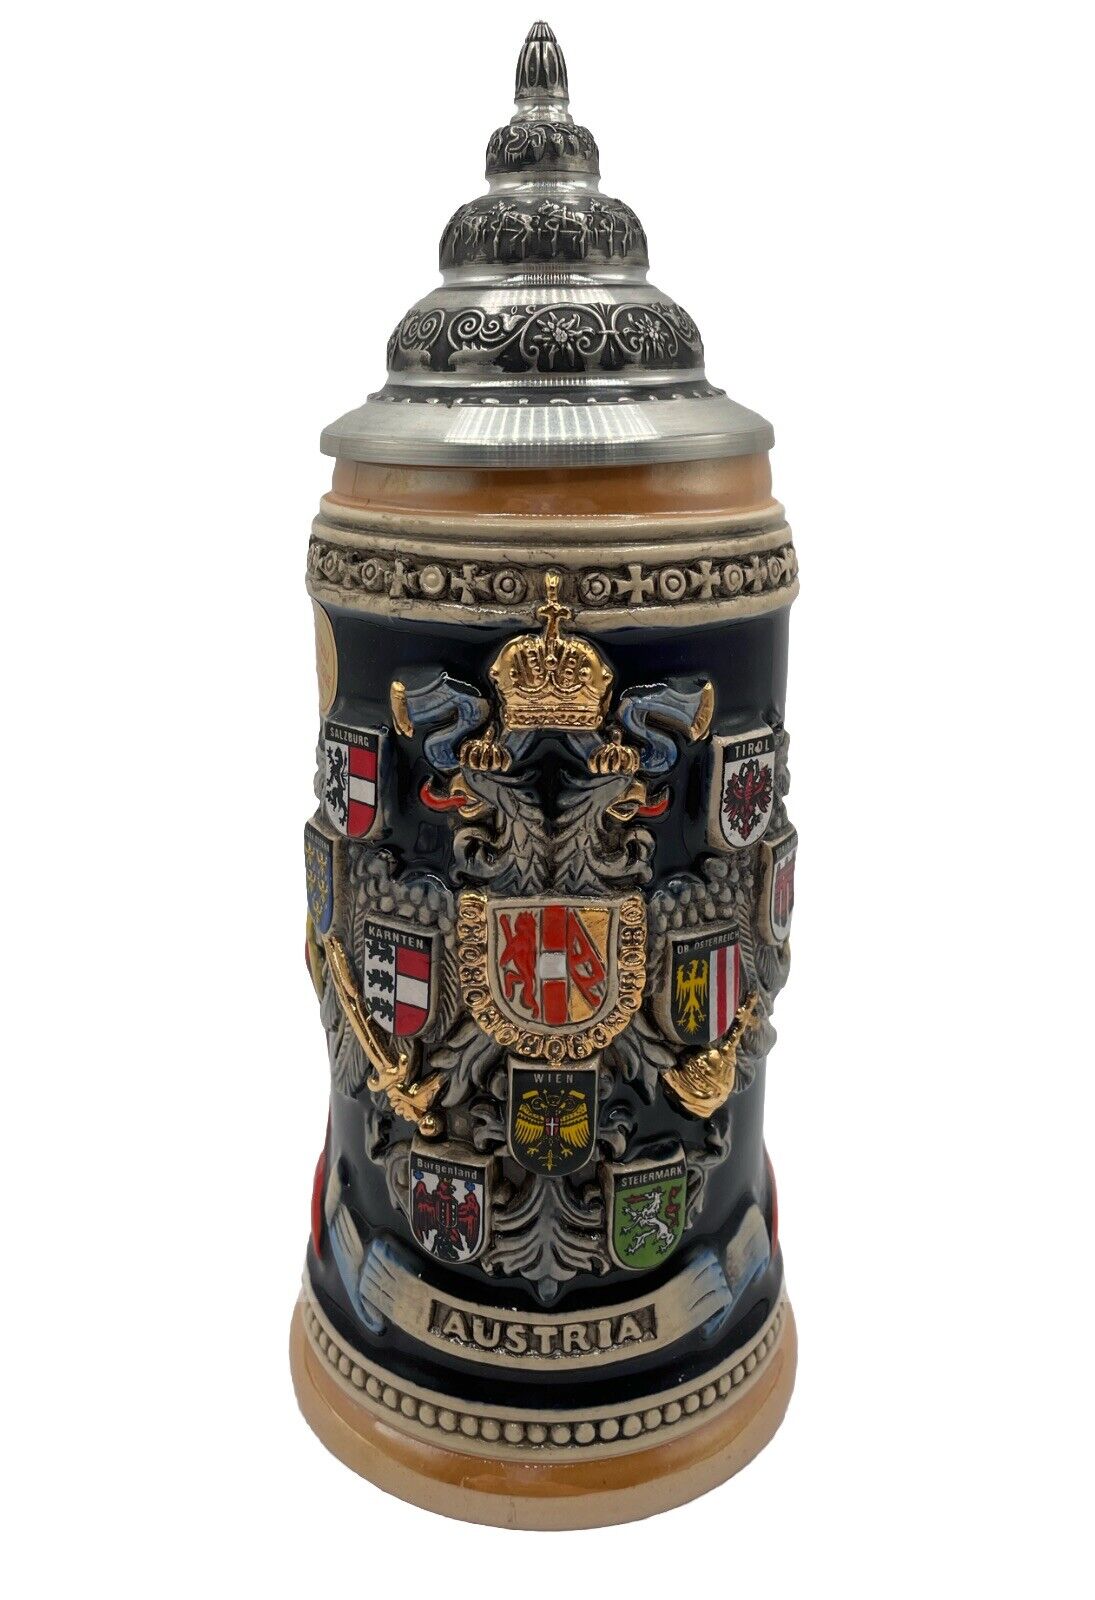 King Limited Edition German Beer Stein Austria Flags & State Crests #933-10000